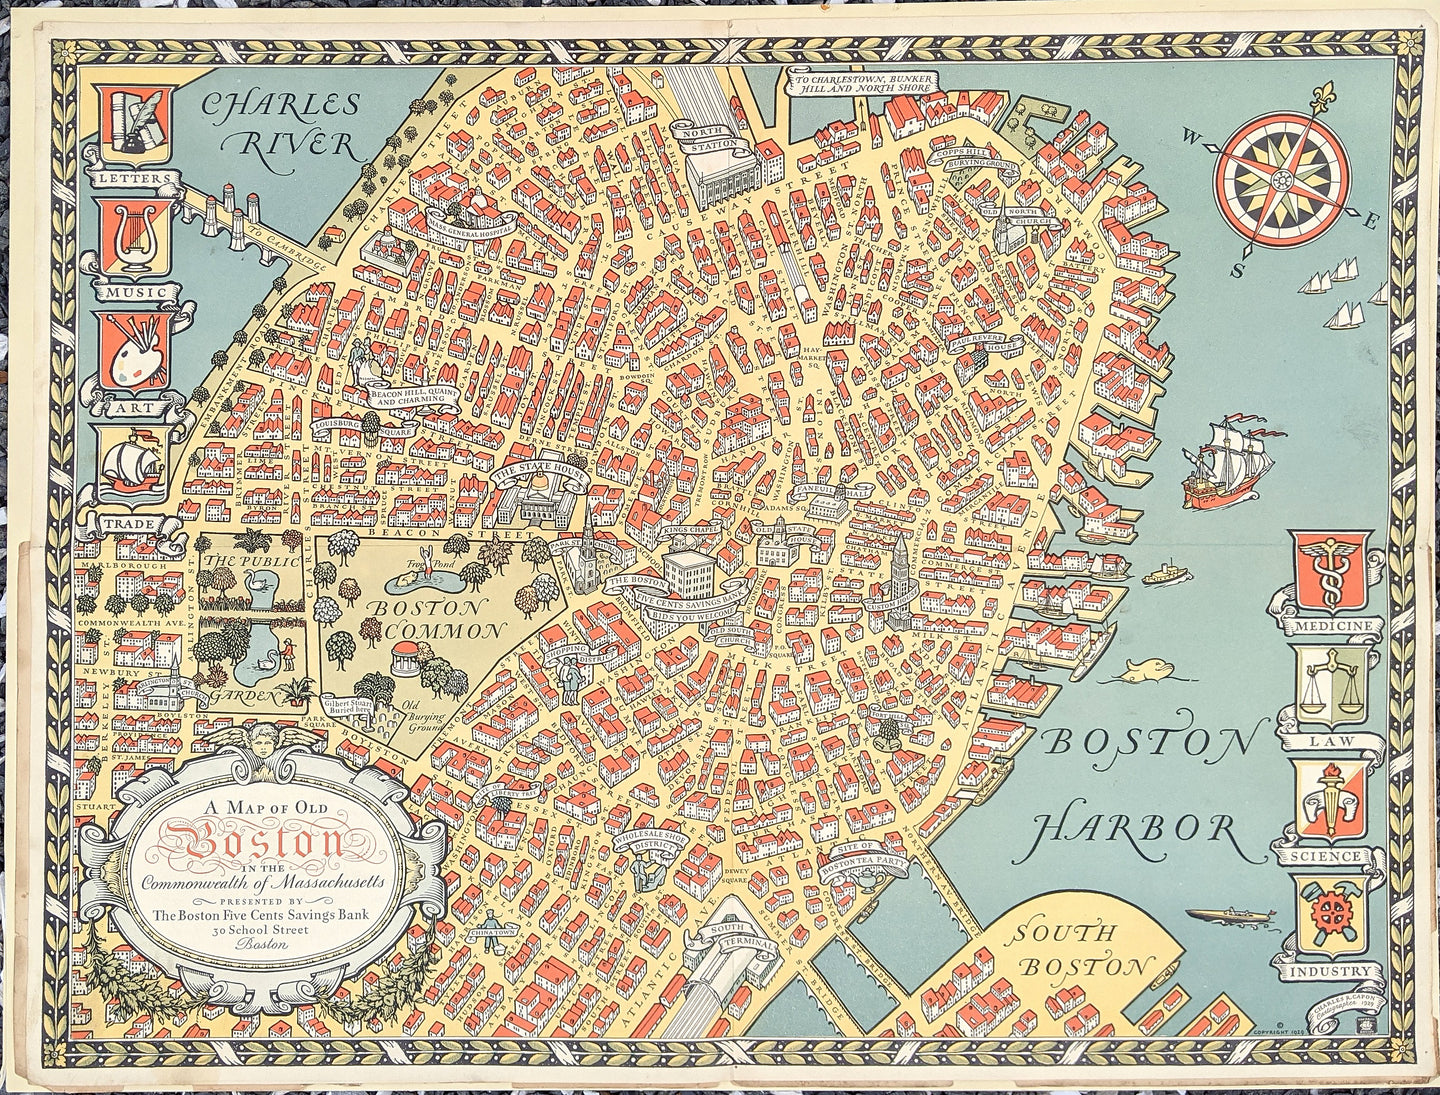 1929 - A Map of Old Boston in the Commonwealth of Massachusetts - Antique Pictorial Map